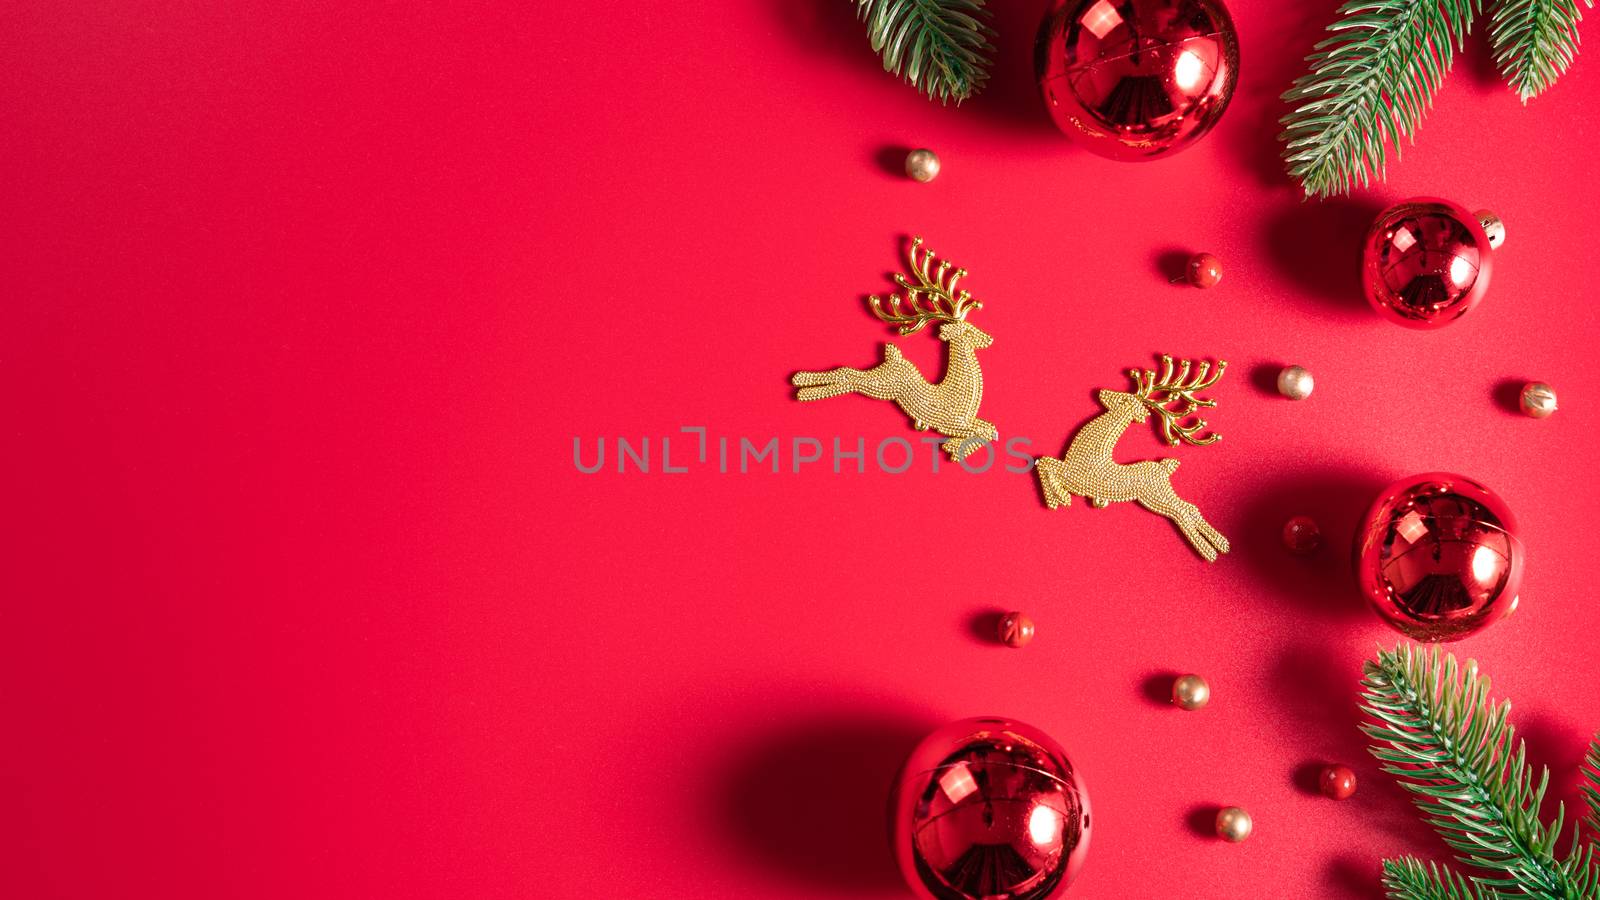 Christmas background. Top view of Christmas decorations on red background with copy space for text. Flat lay, winter, postcard template, new year concept. by mikesaran